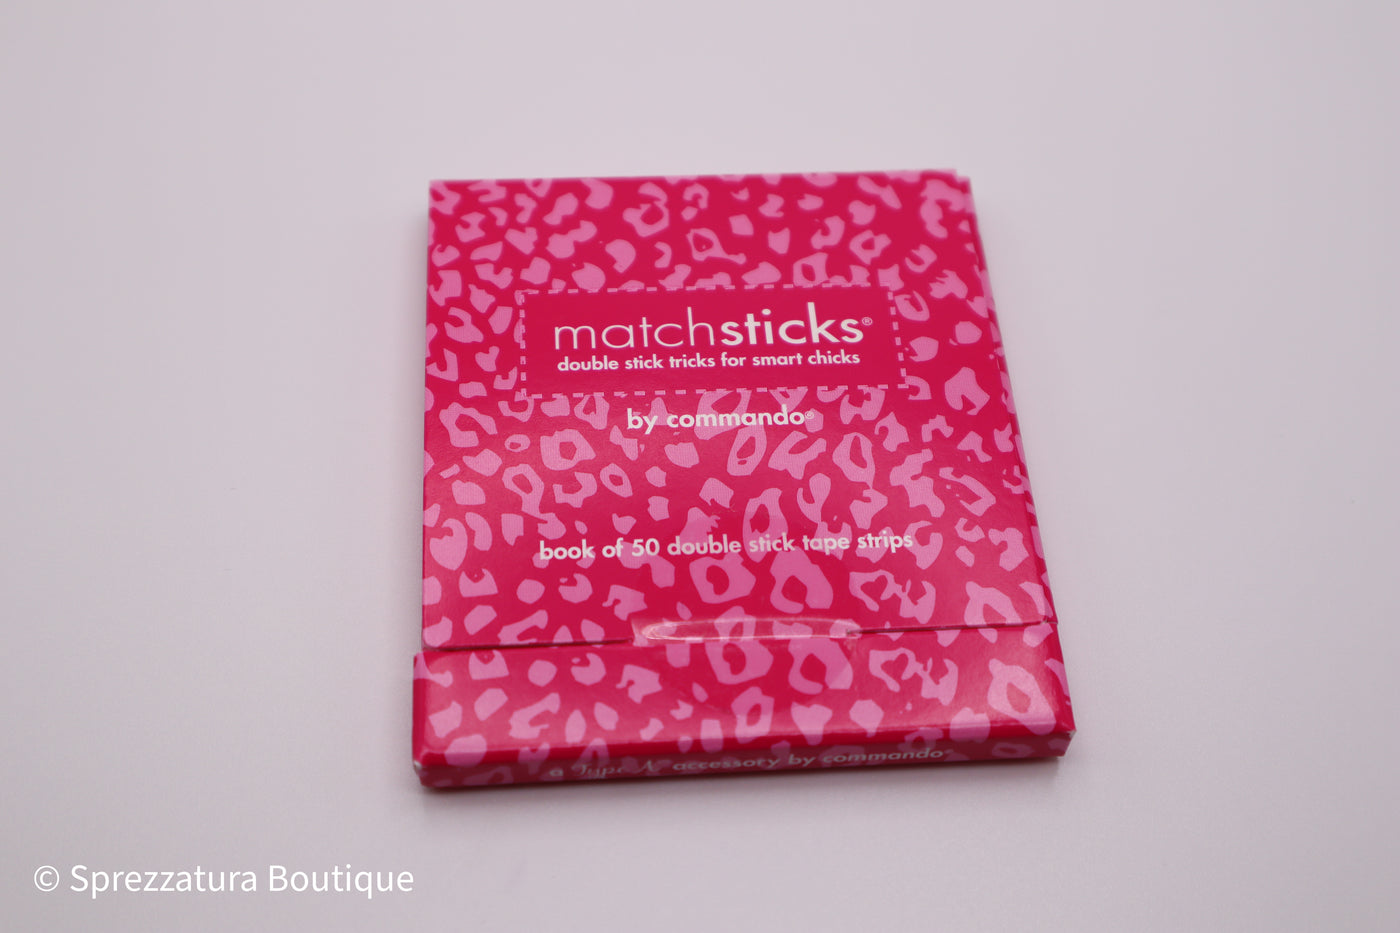 Matchstick by Commando are double stick tape to keep your clothes secure. Holds clothes in place.